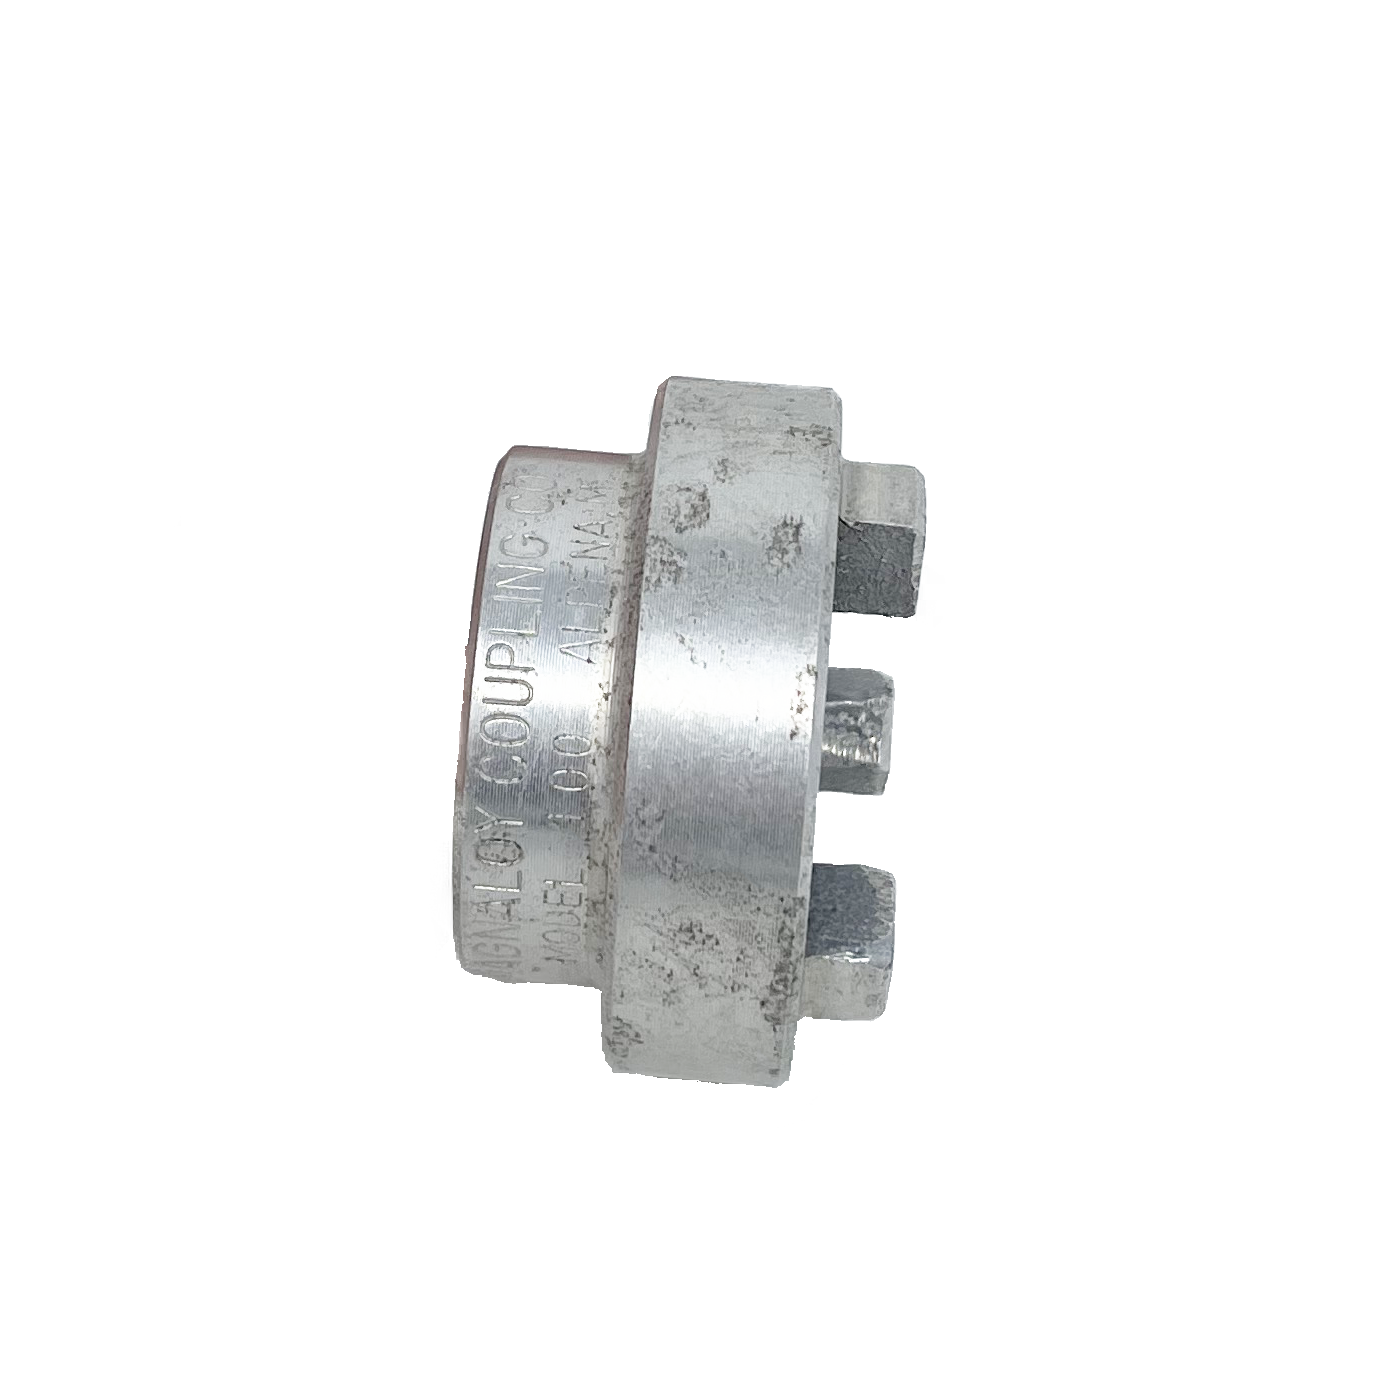 400 27T 16/32  : Magnaloy 400 HUB 27 TOOTH 16/32 - NO S.S. OR CLAMP, M400A2716N